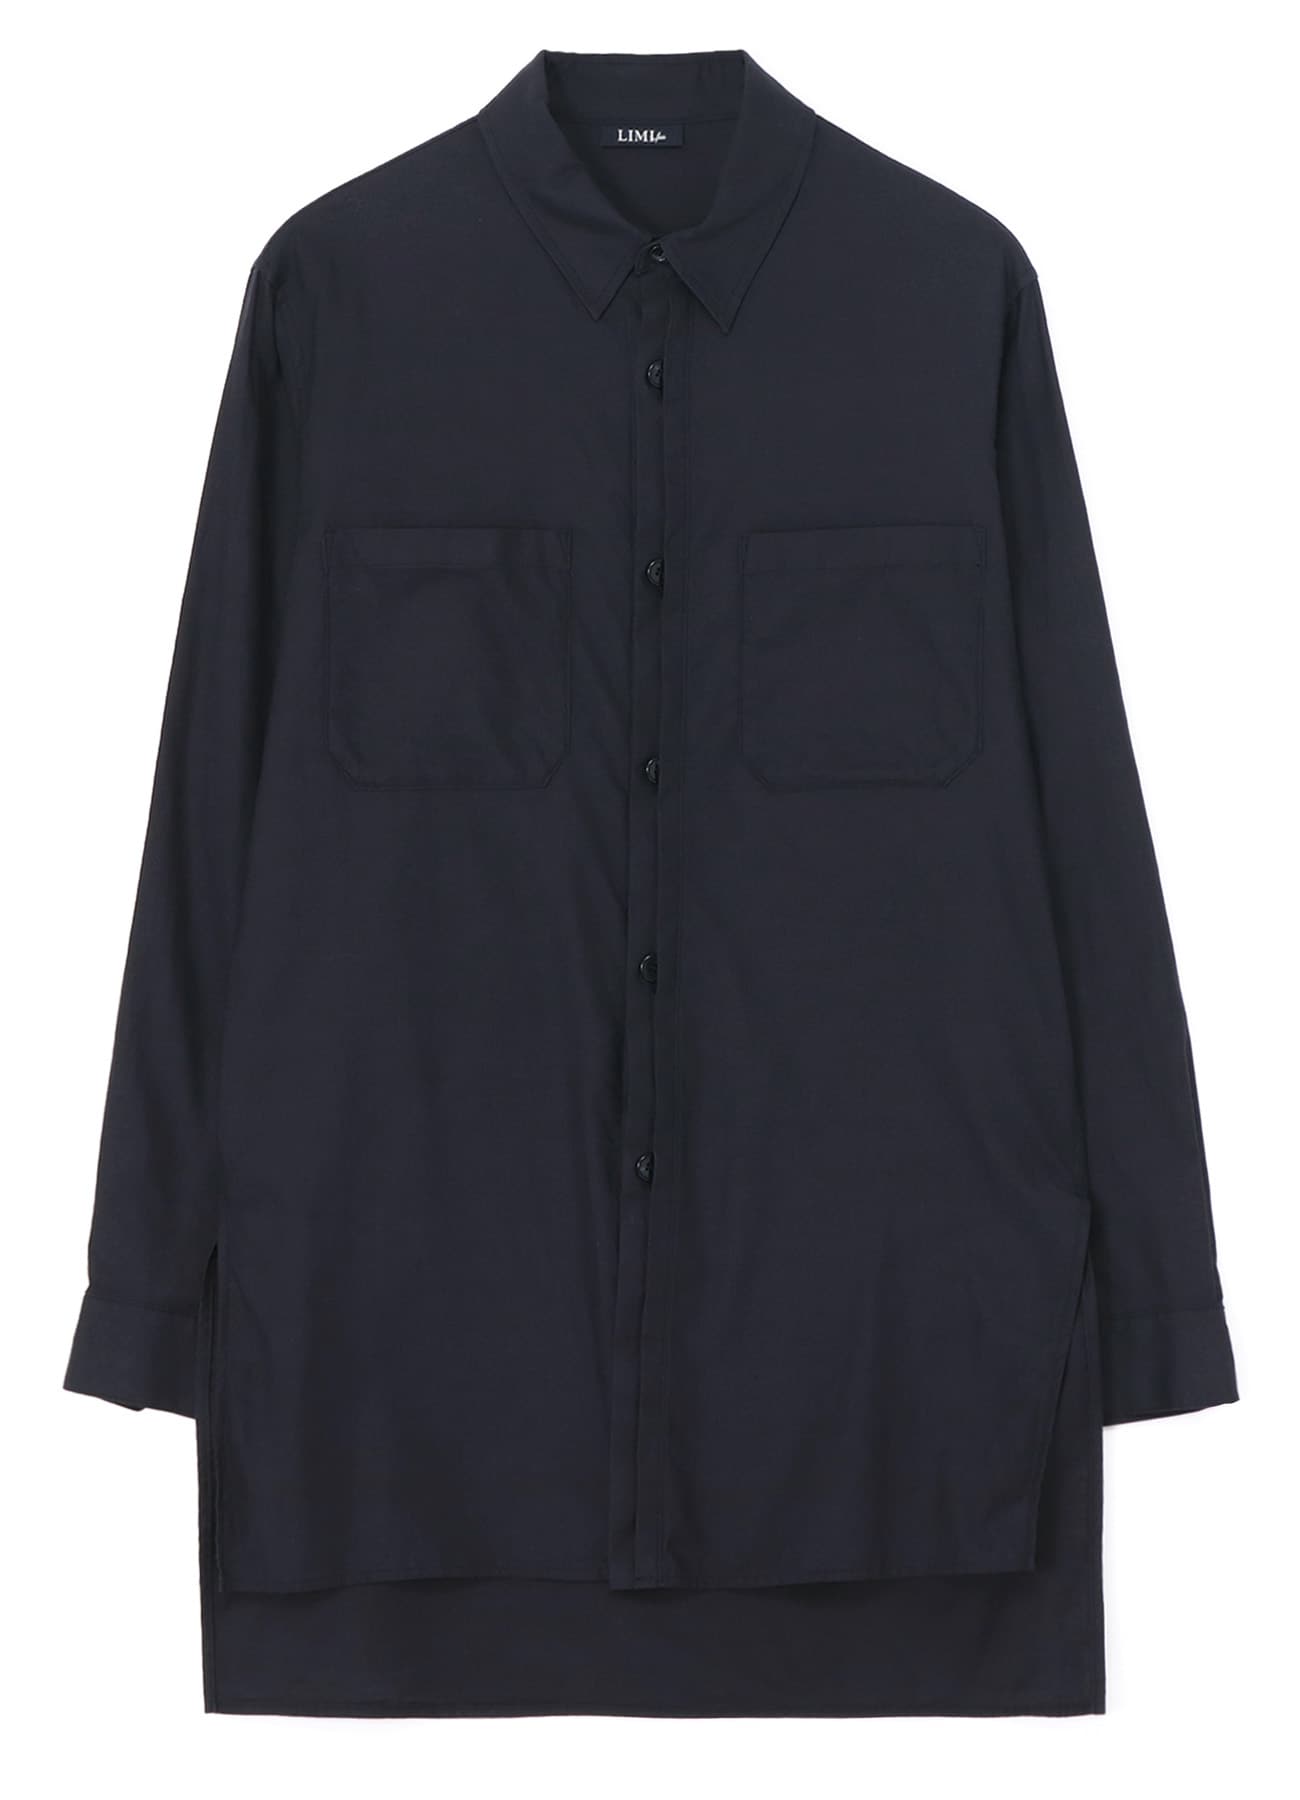 COTTON TWILL SHIRT WITH COVERED PLACKET